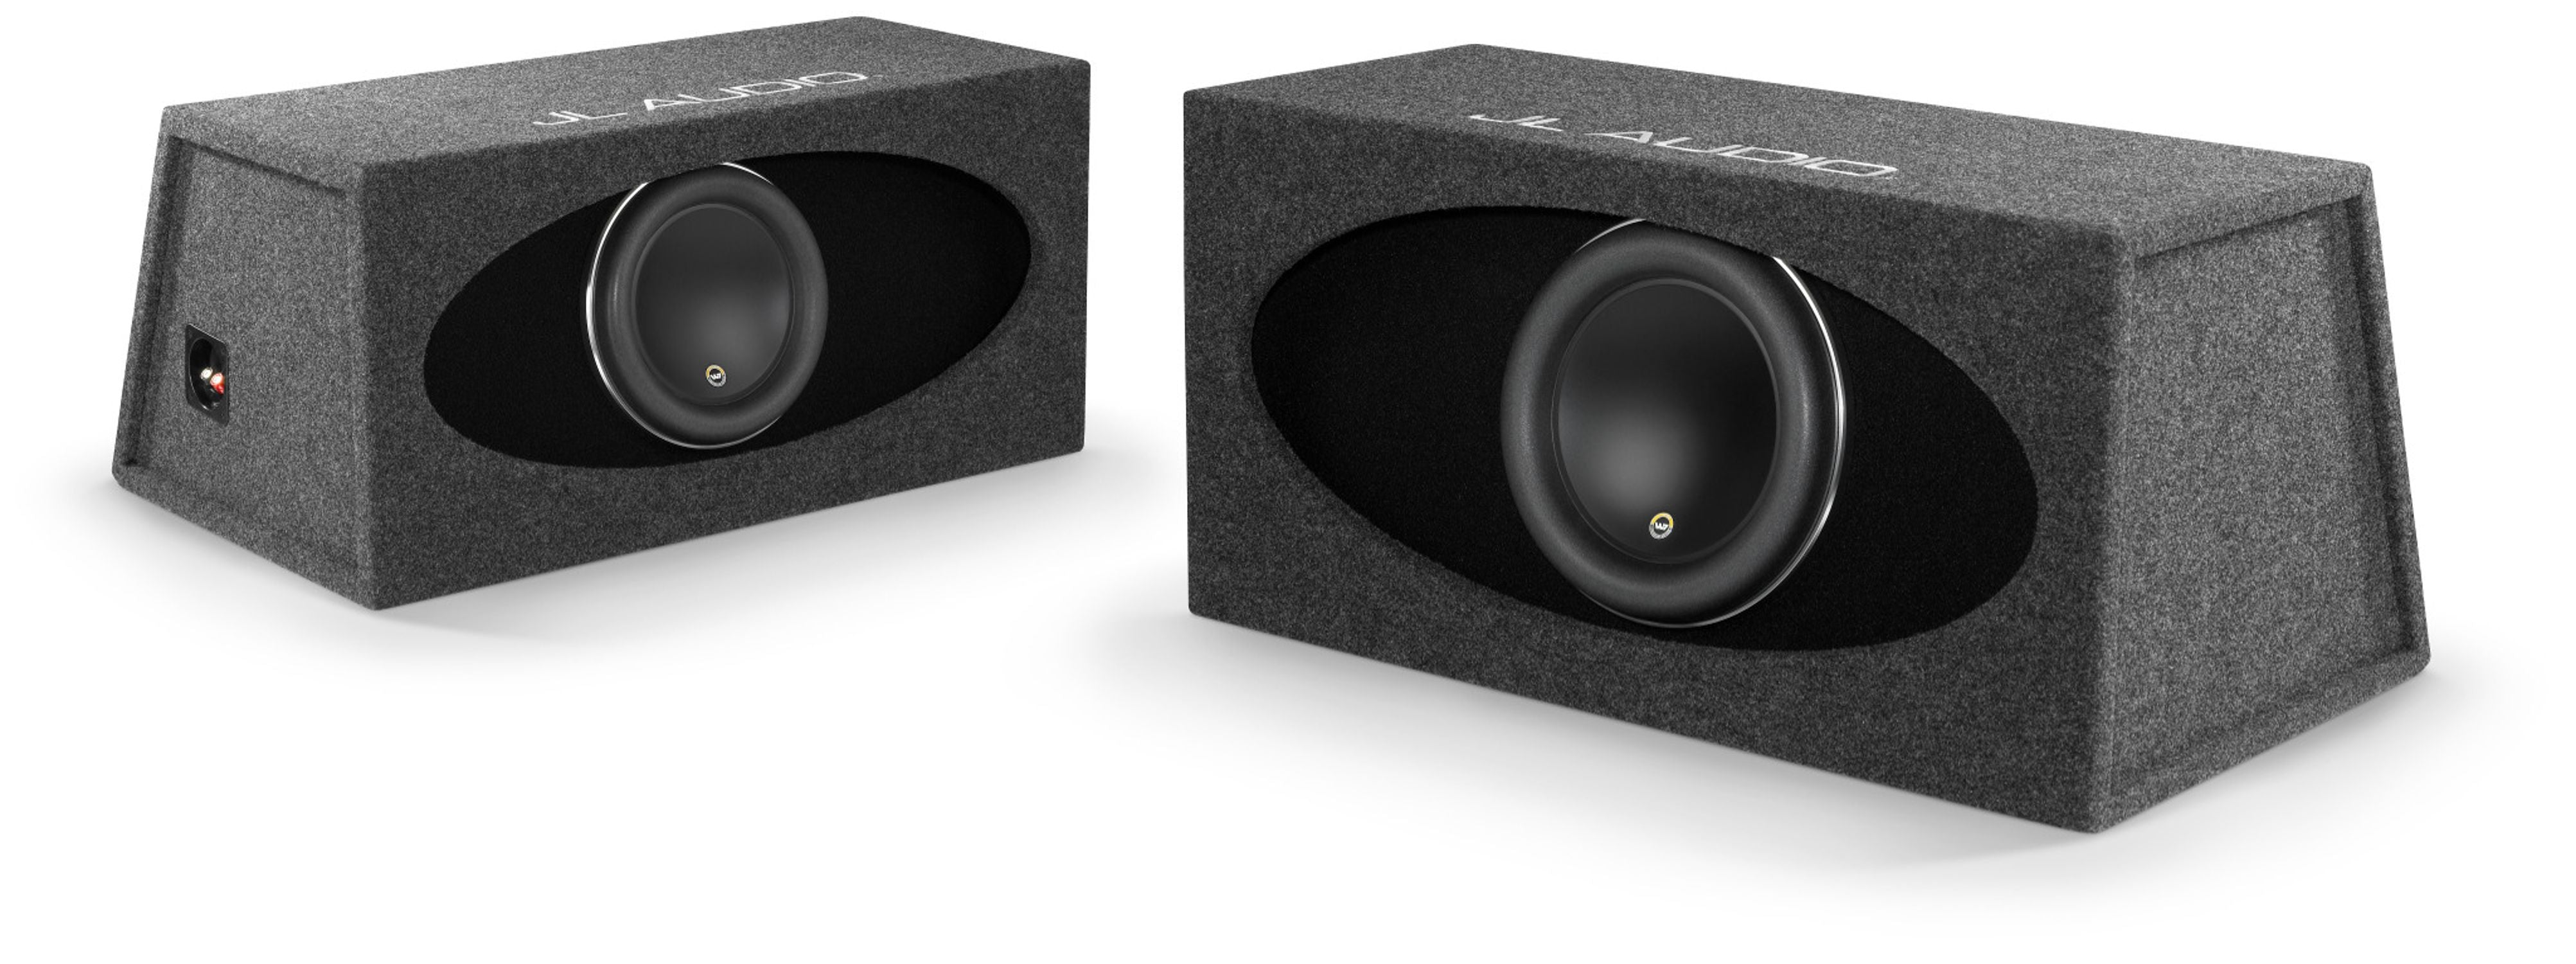 HO112R-W7AE Enclosed Subwoofer Pair Showing Front and Rear